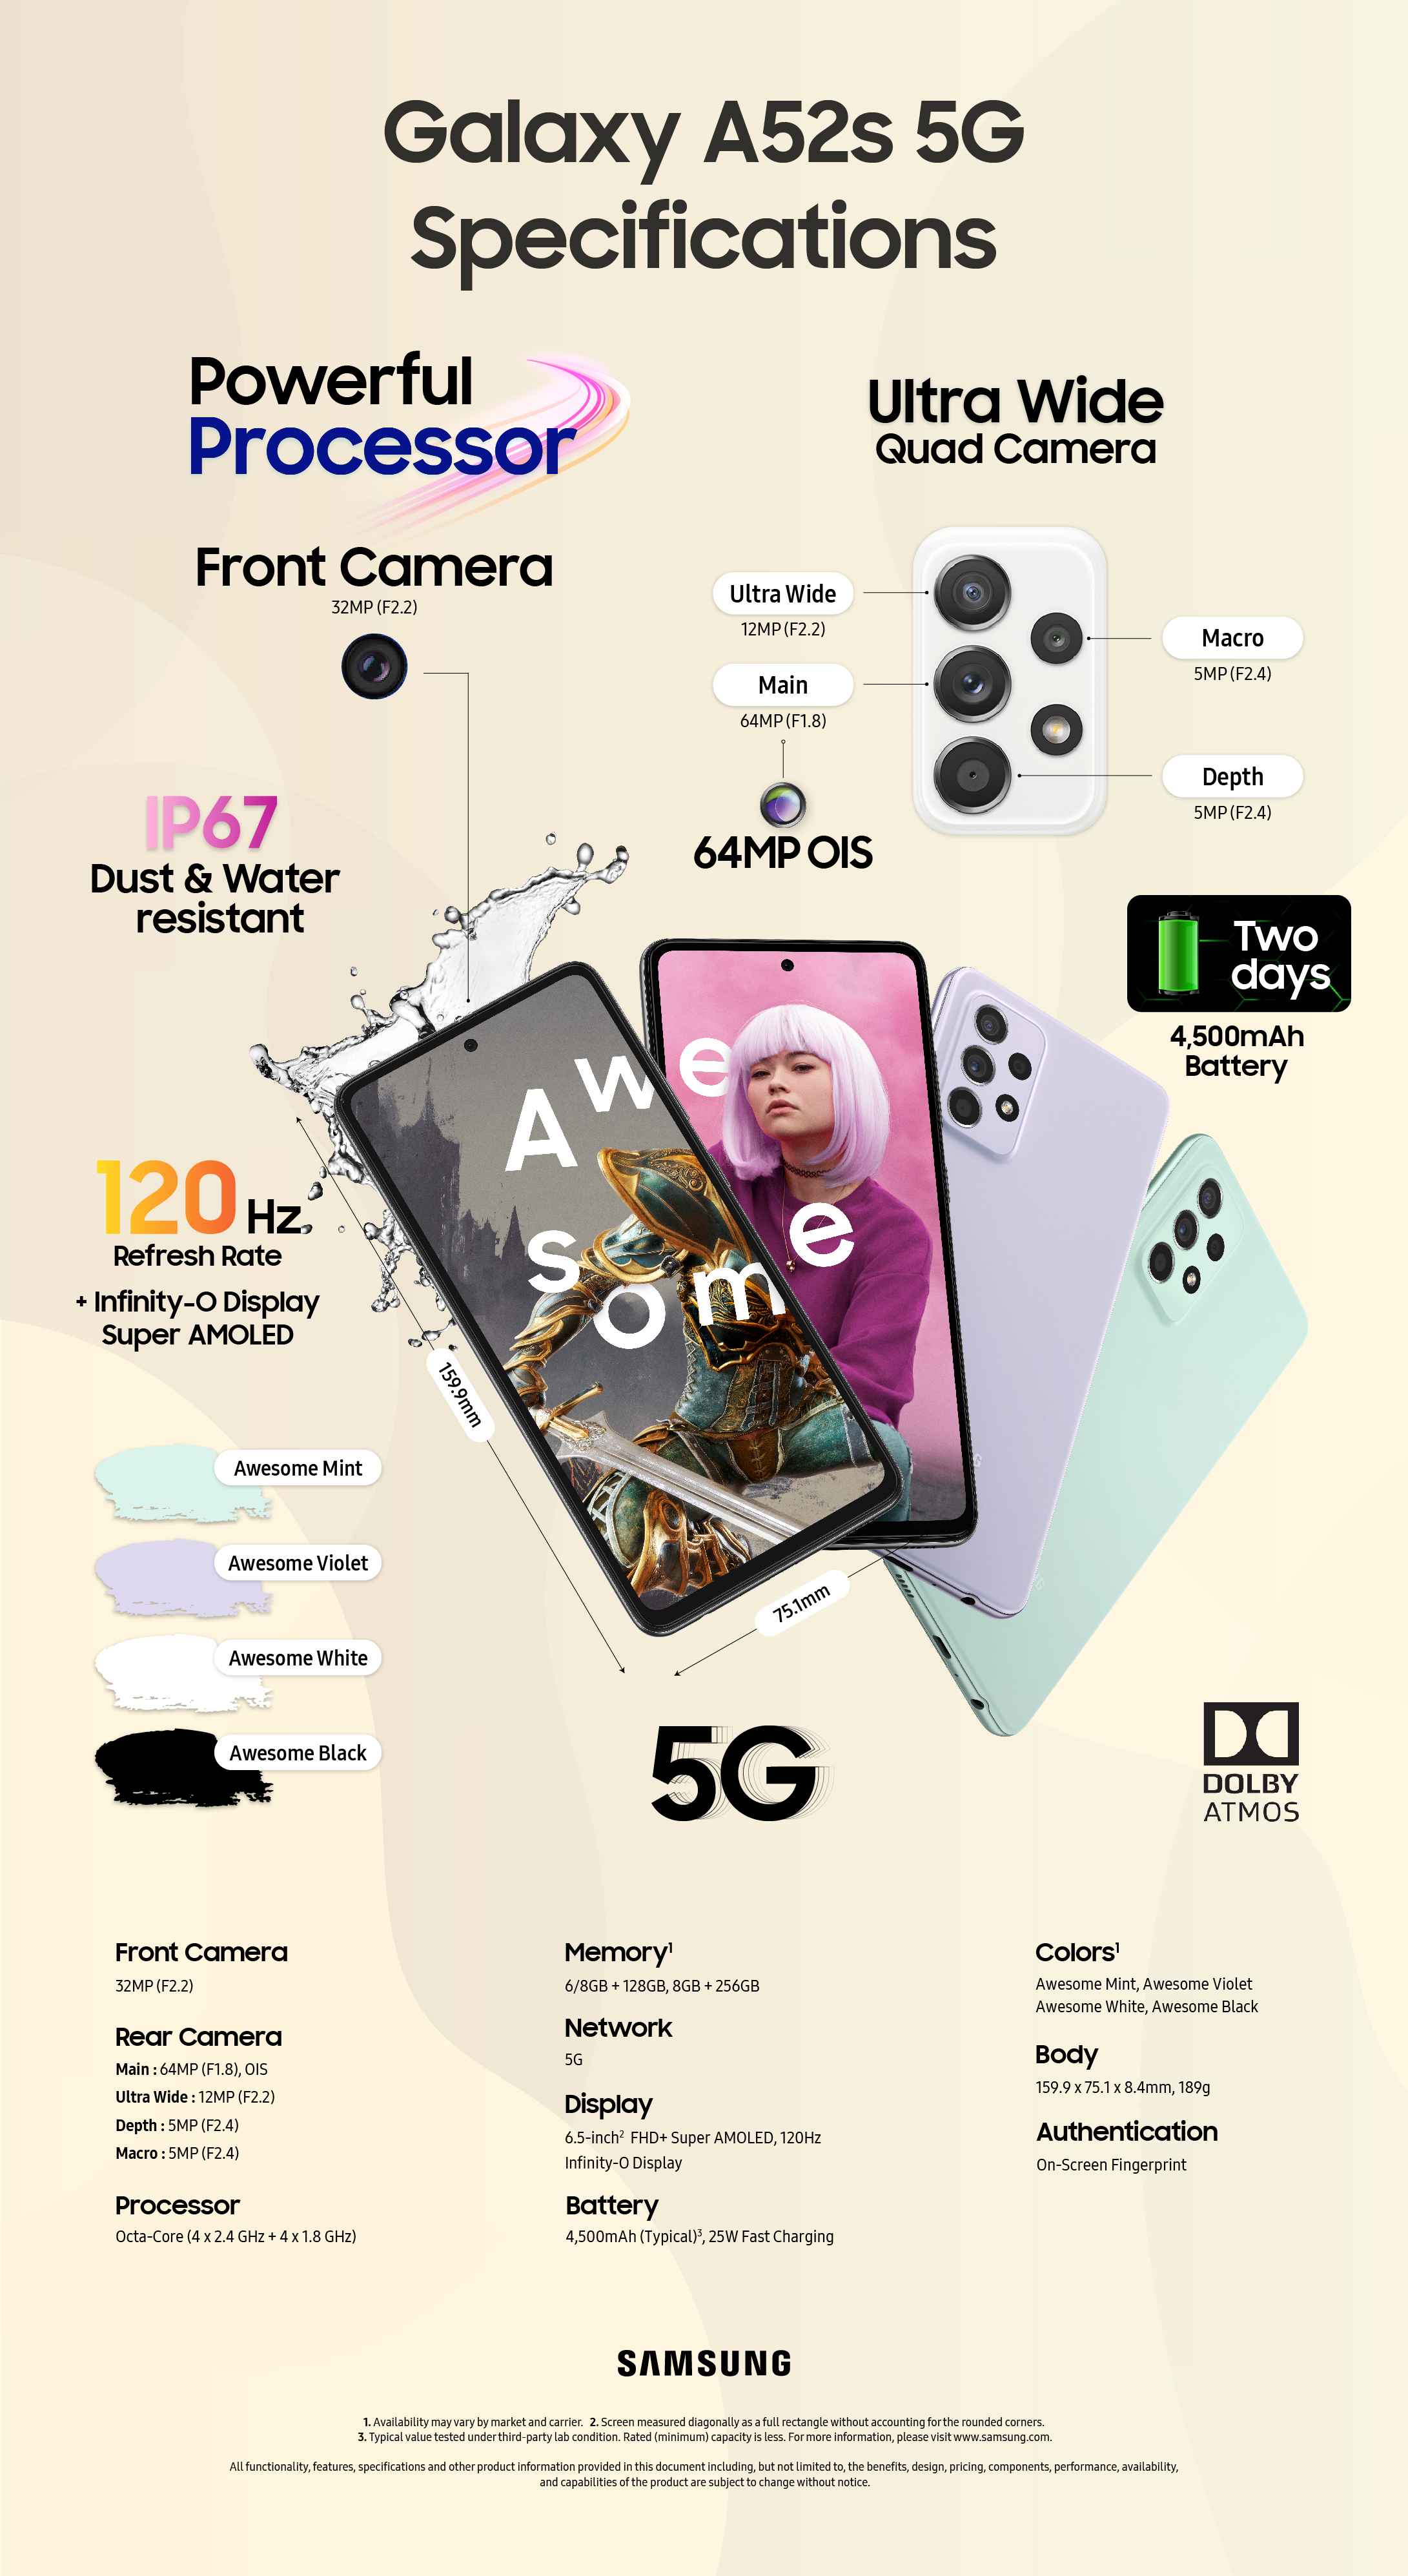 Spec Infographic of Galaxy A52s 5G